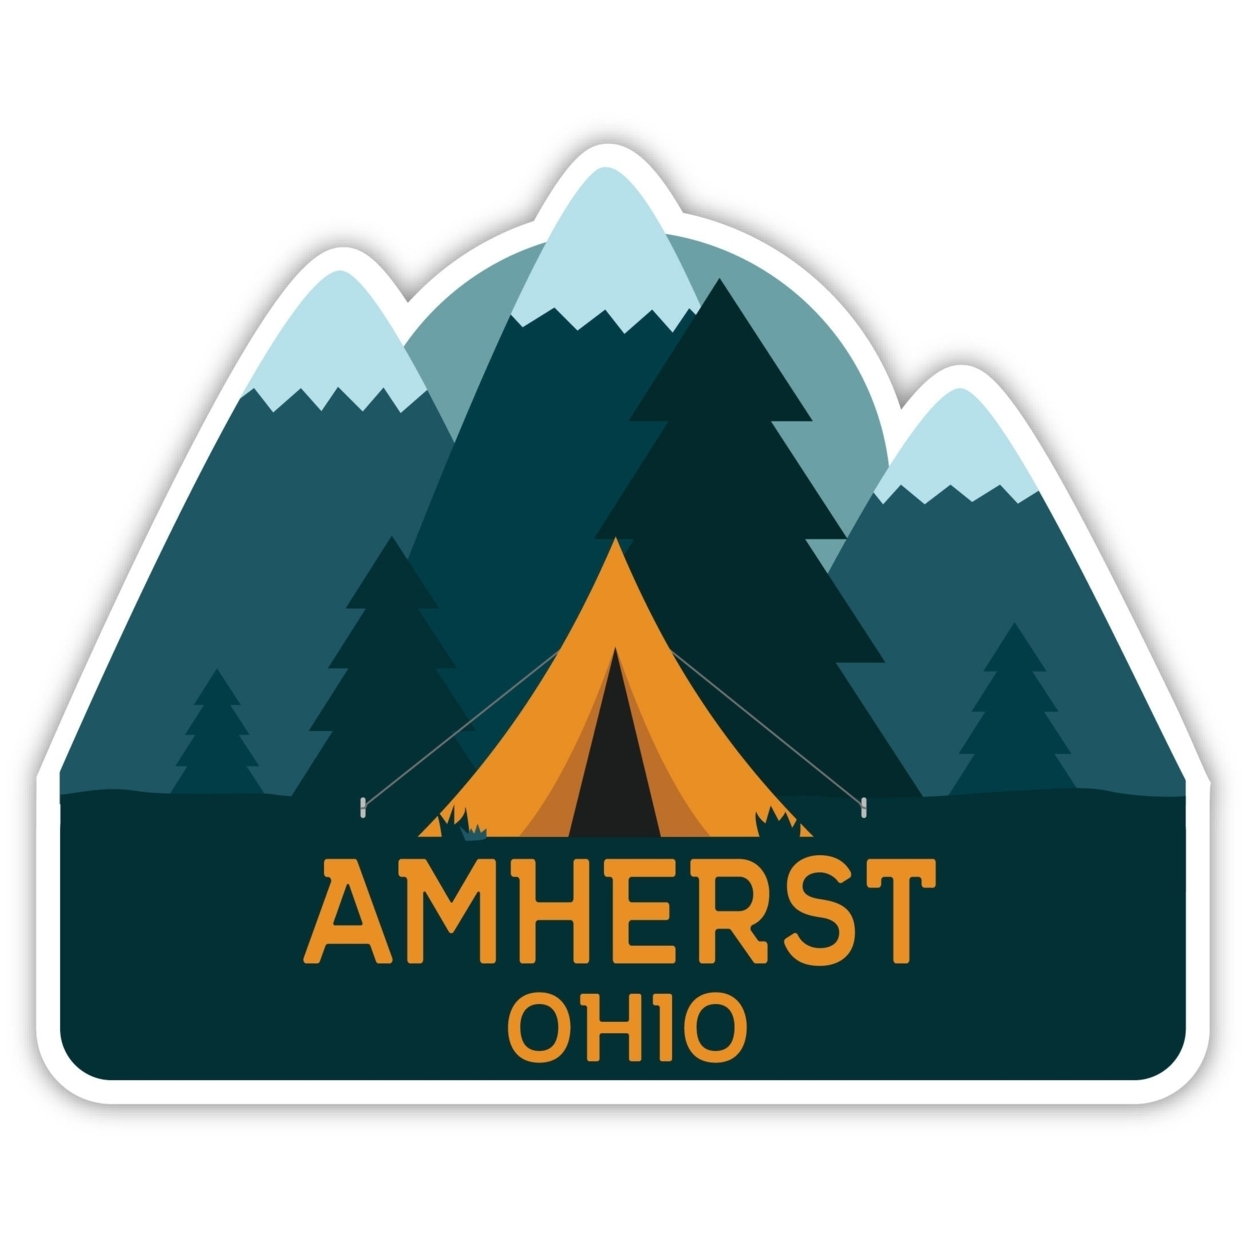 Amherst Ohio Souvenir Decorative Stickers (Choose Theme And Size) - 4-Pack, 2-Inch, Tent